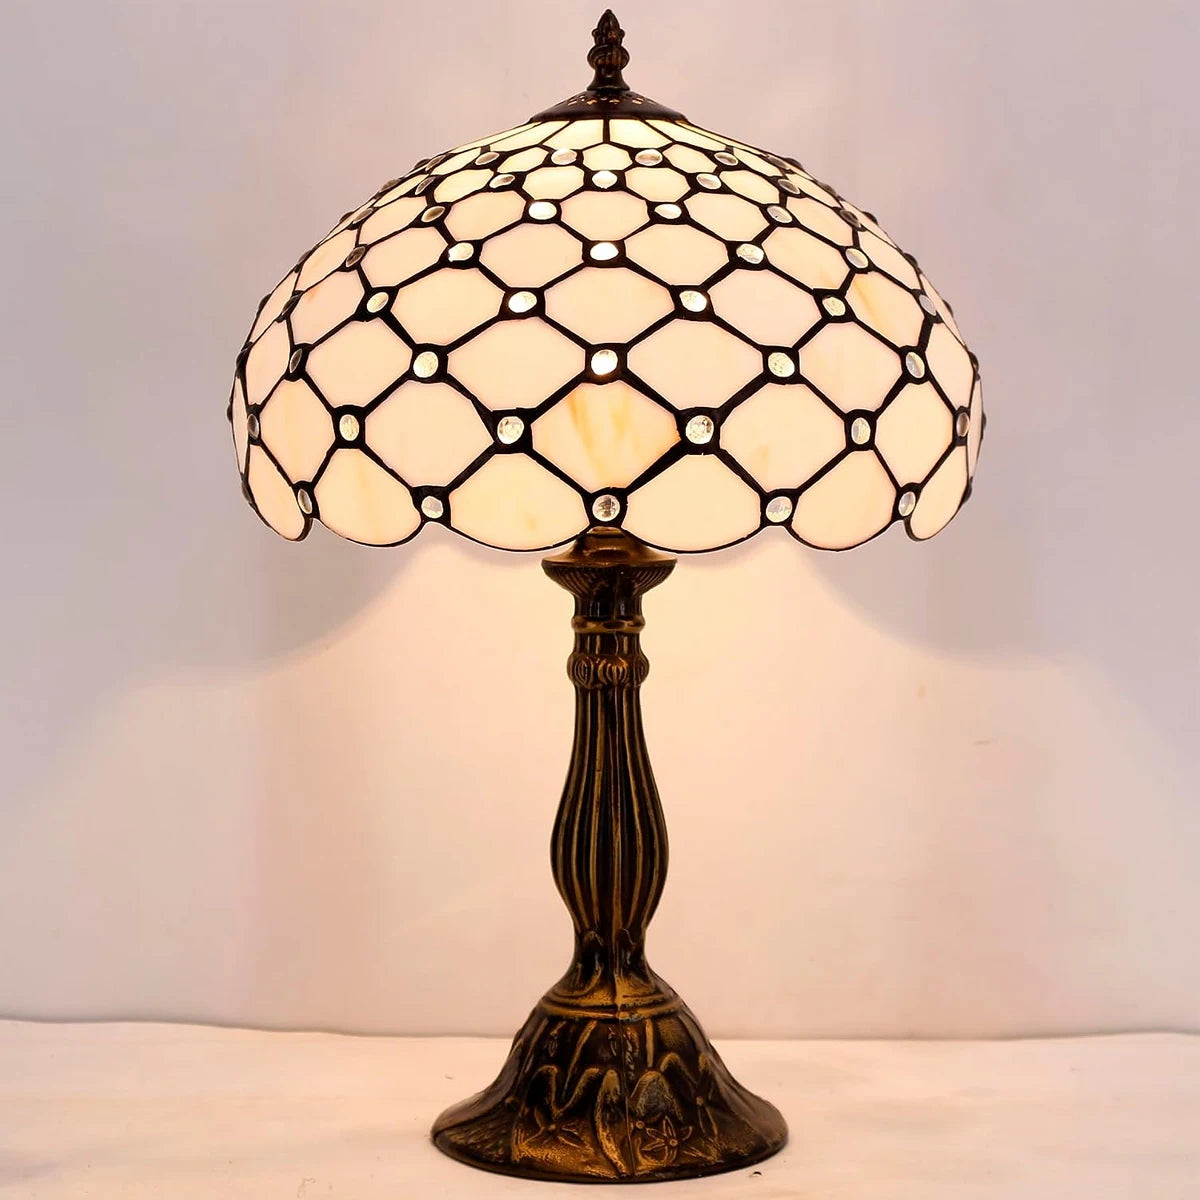 Tiffany Lamp Cream Amber Stained Glass Bead Table Lamp Desk